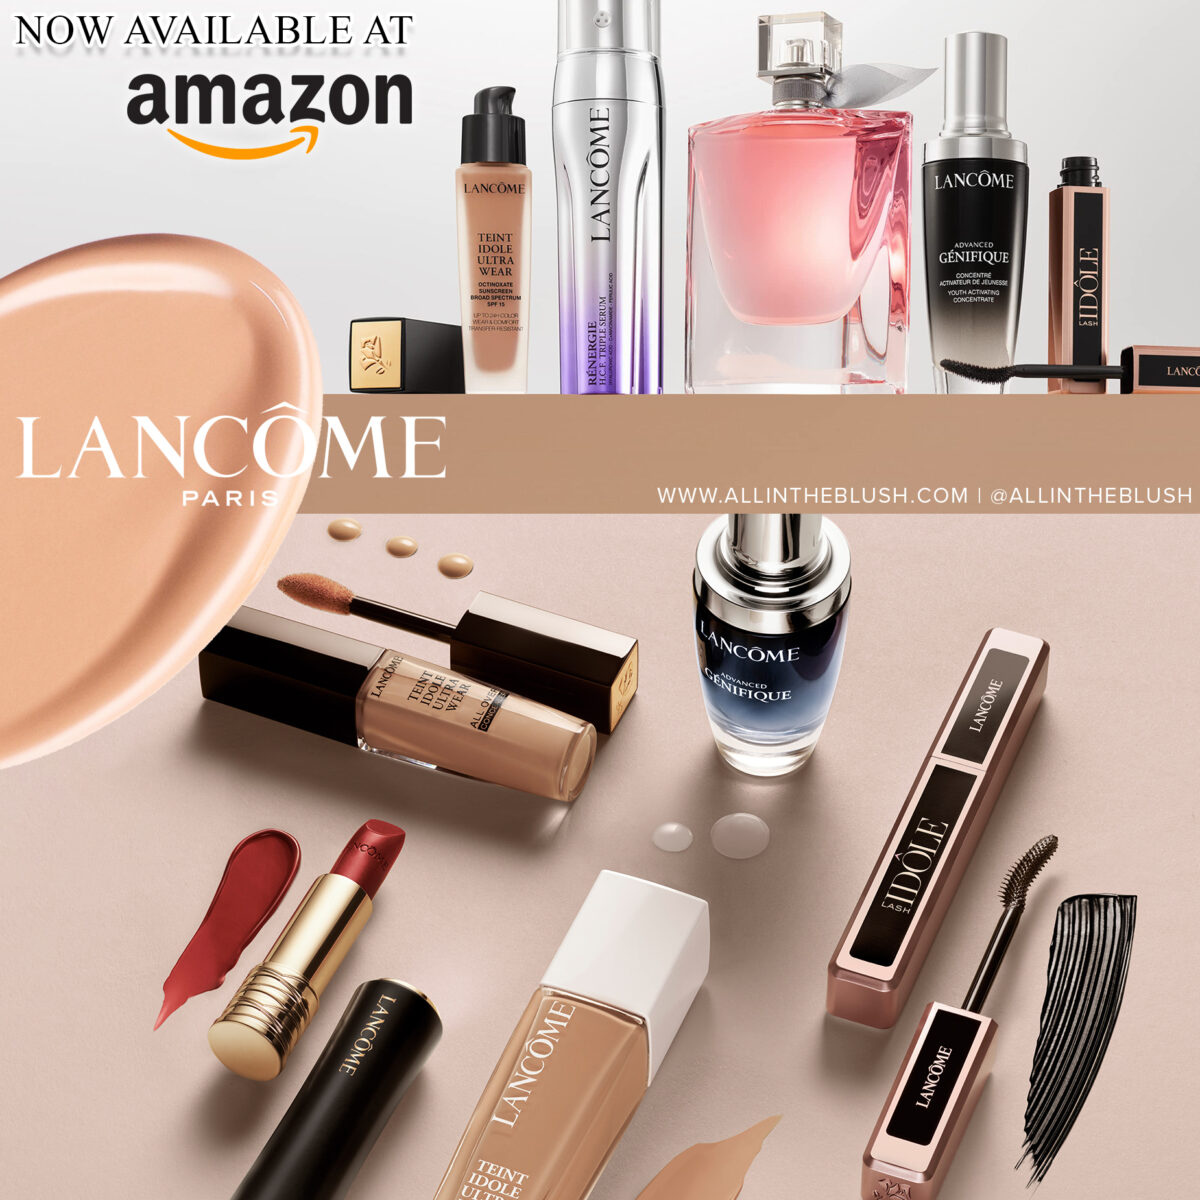 Lancome Now Available at Amazon